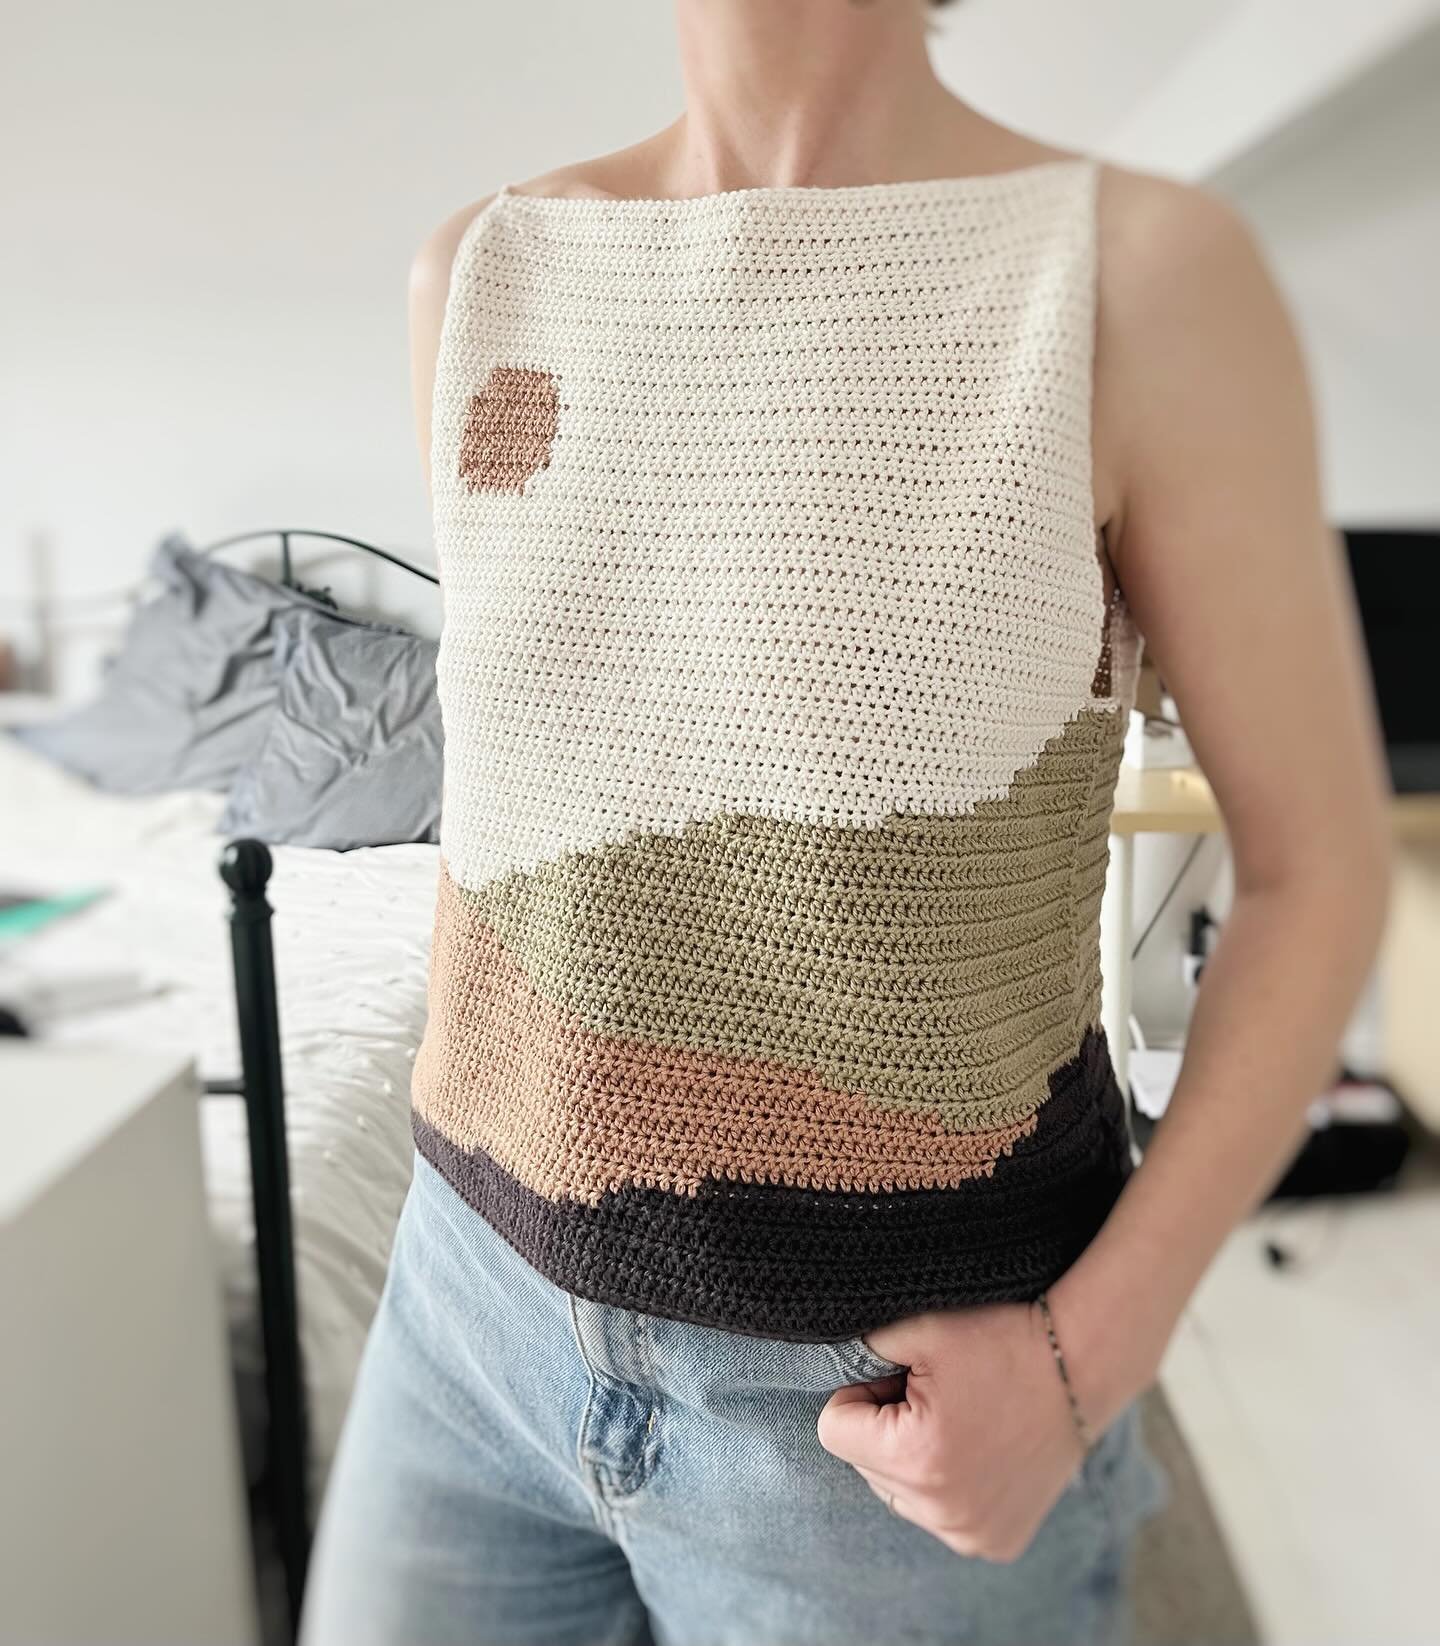 ✨ TESTER CALL ✨
⠀⠀⠀⠀⠀⠀⠀⠀⠀
Introducing the &lsquo;Terra&rsquo; top ⛰️ 
⠀⠀⠀⠀⠀⠀⠀⠀⠀
Made using Stylecraft Naturals dk cotton/bamboo.
⠀⠀⠀⠀⠀⠀⠀⠀⠀
I&rsquo;m looking for testers for sizes XS - 5X
⠀⠀⠀⠀⠀⠀⠀⠀⠀
This is an intarsia/tapestry crochet top, with one st